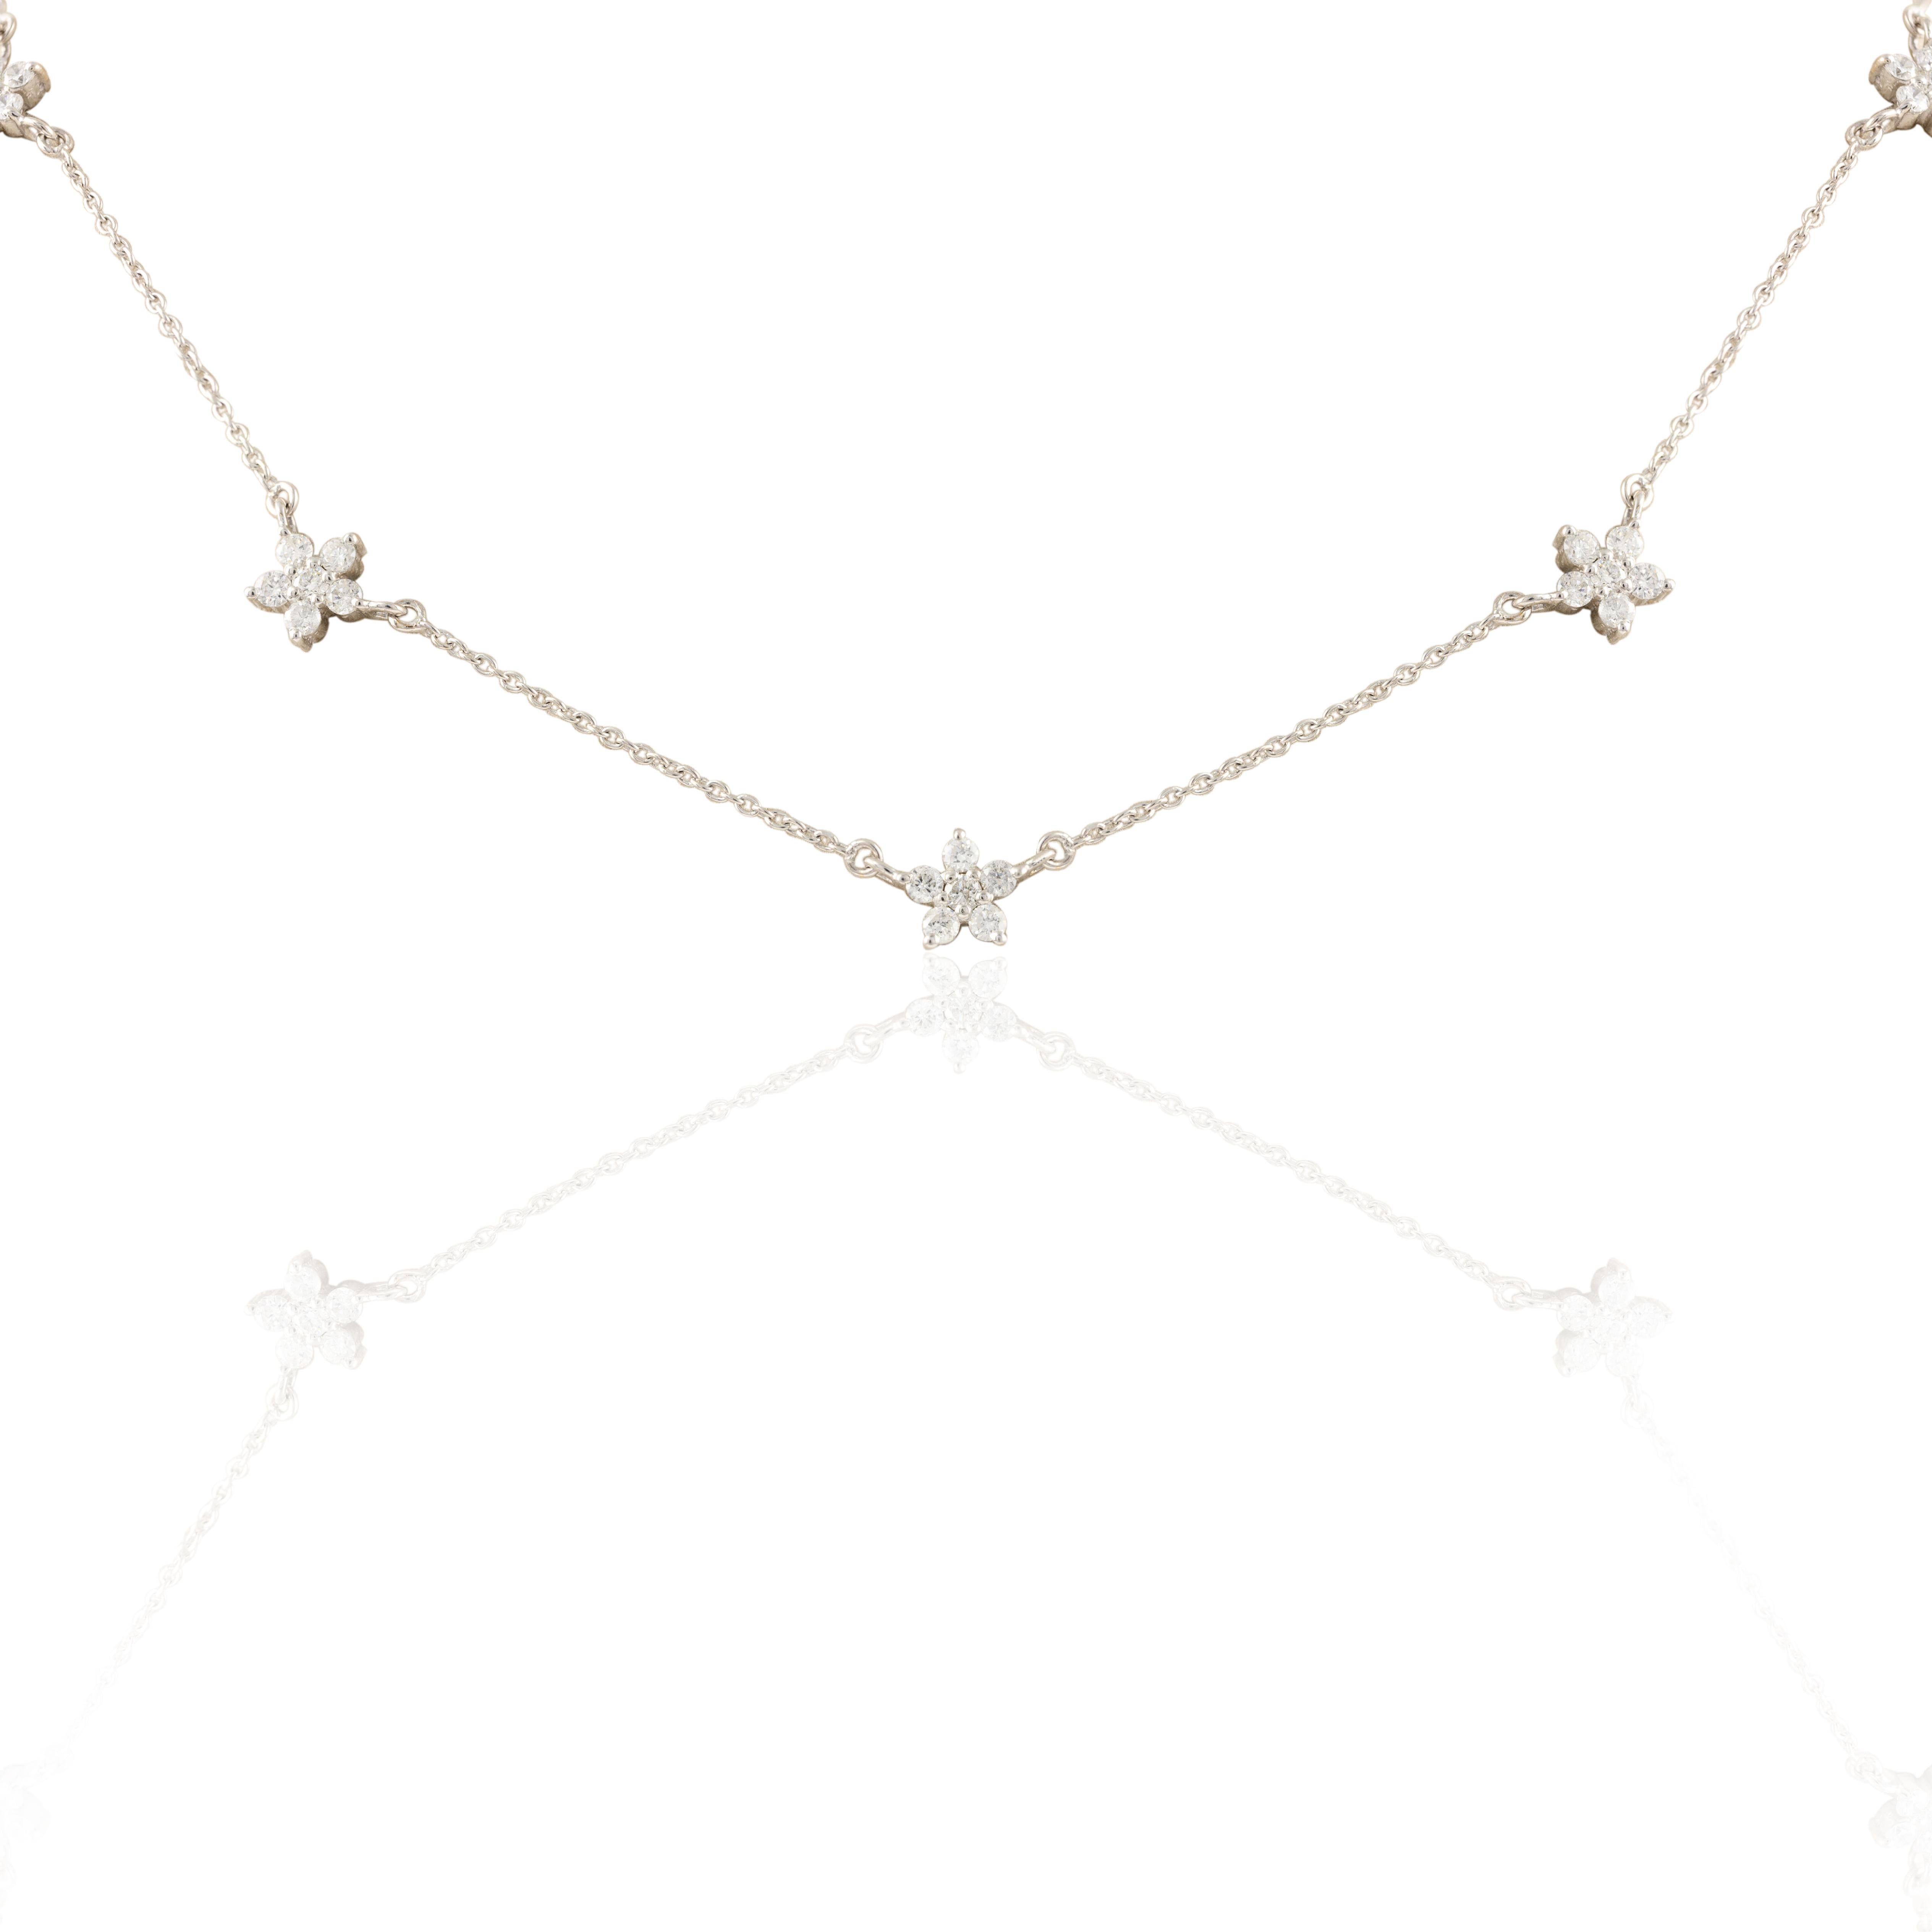 Star Diamond Chain Necklace in 14K Gold studded with round cut diamond. This stunning piece of jewelry instantly elevates a casual look or dressy outfit. 
April birthstone diamond brings love, fame, success and prosperity.
Designed with diamonds